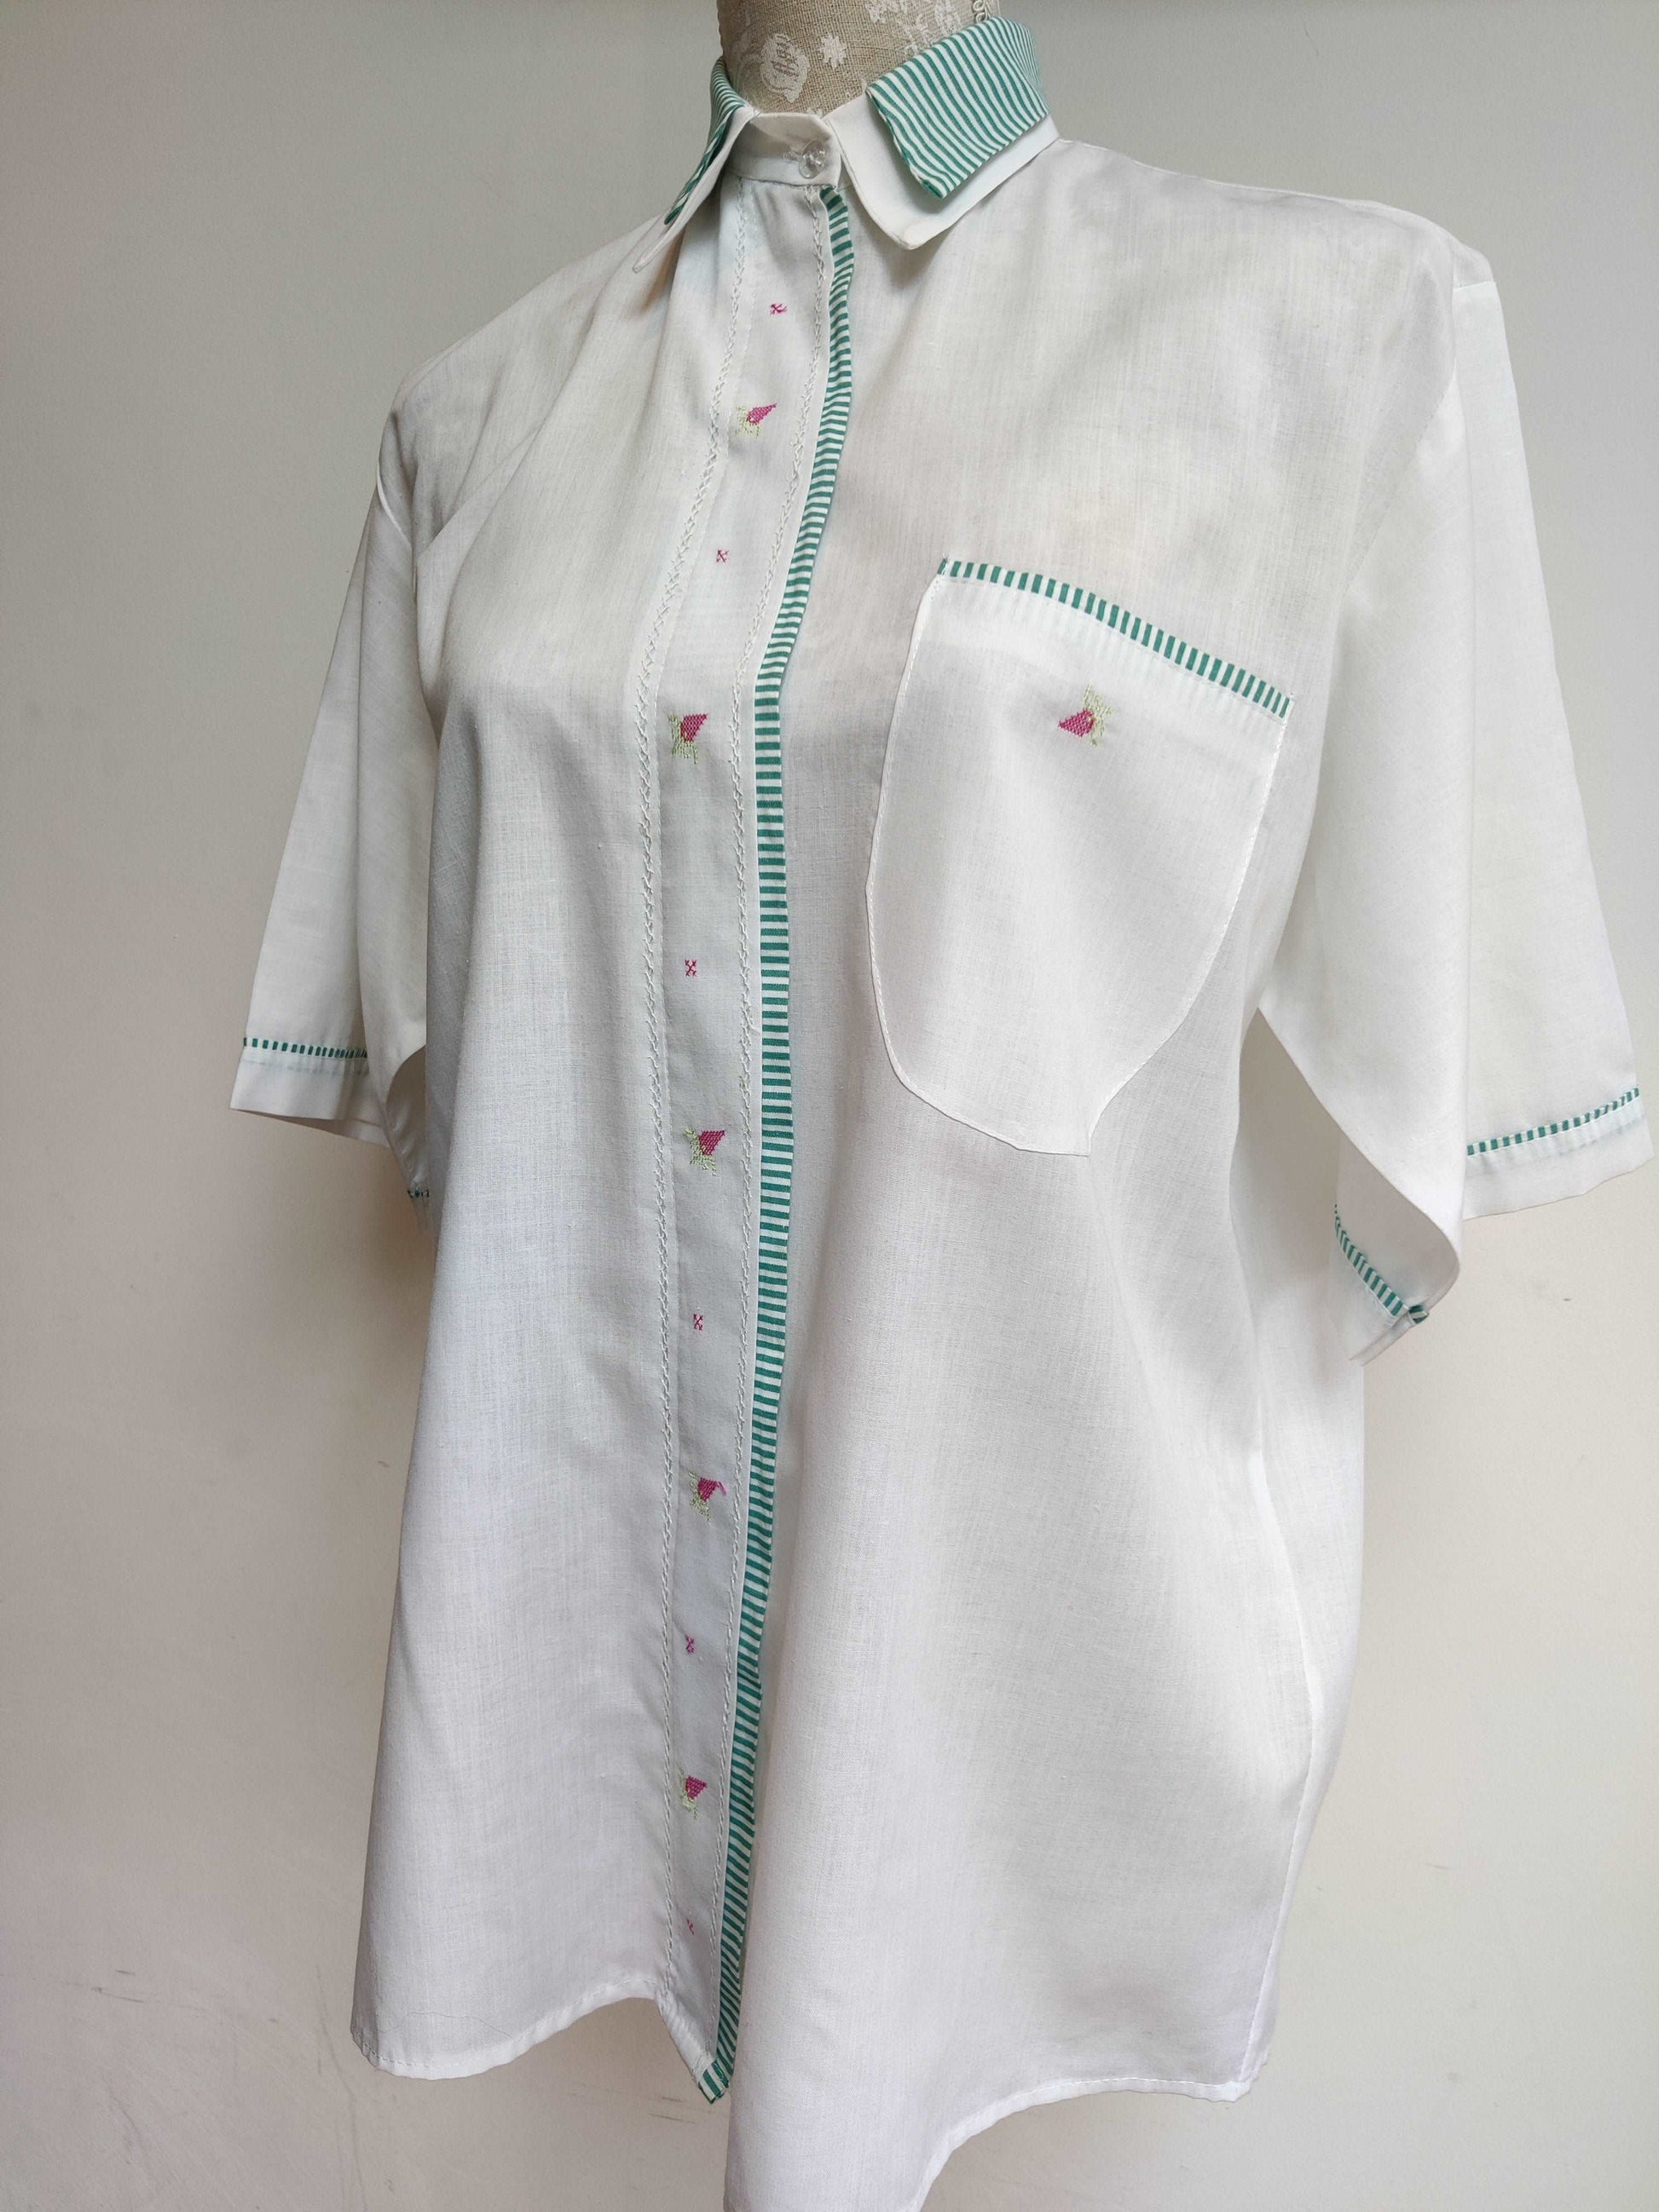 Vintage white shirt with cross stitch detail. 16-18